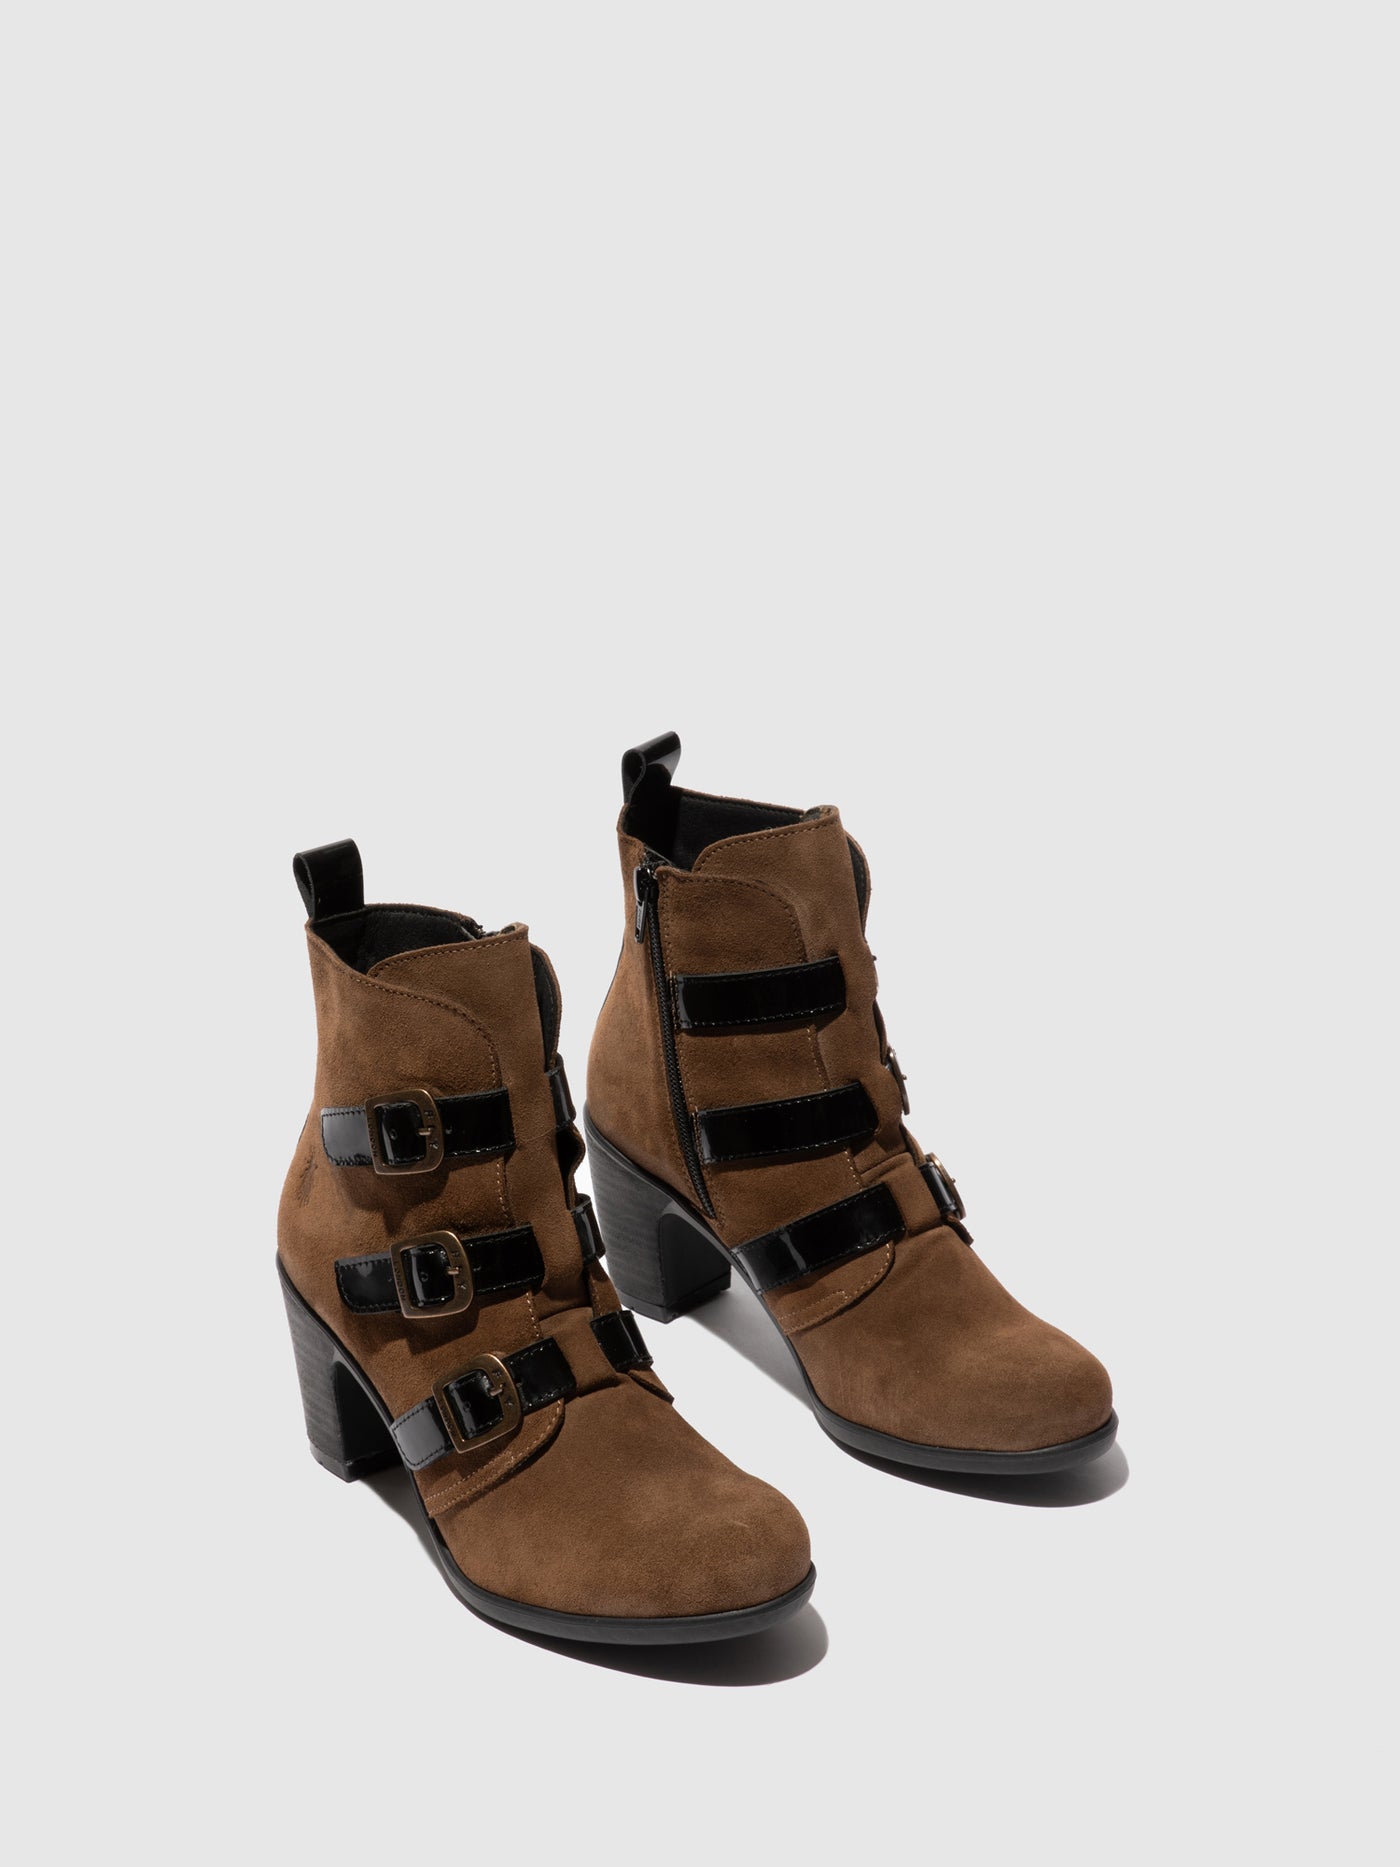 Buckle Ankle Boots KLEA012FLY TAUPE/BLACK